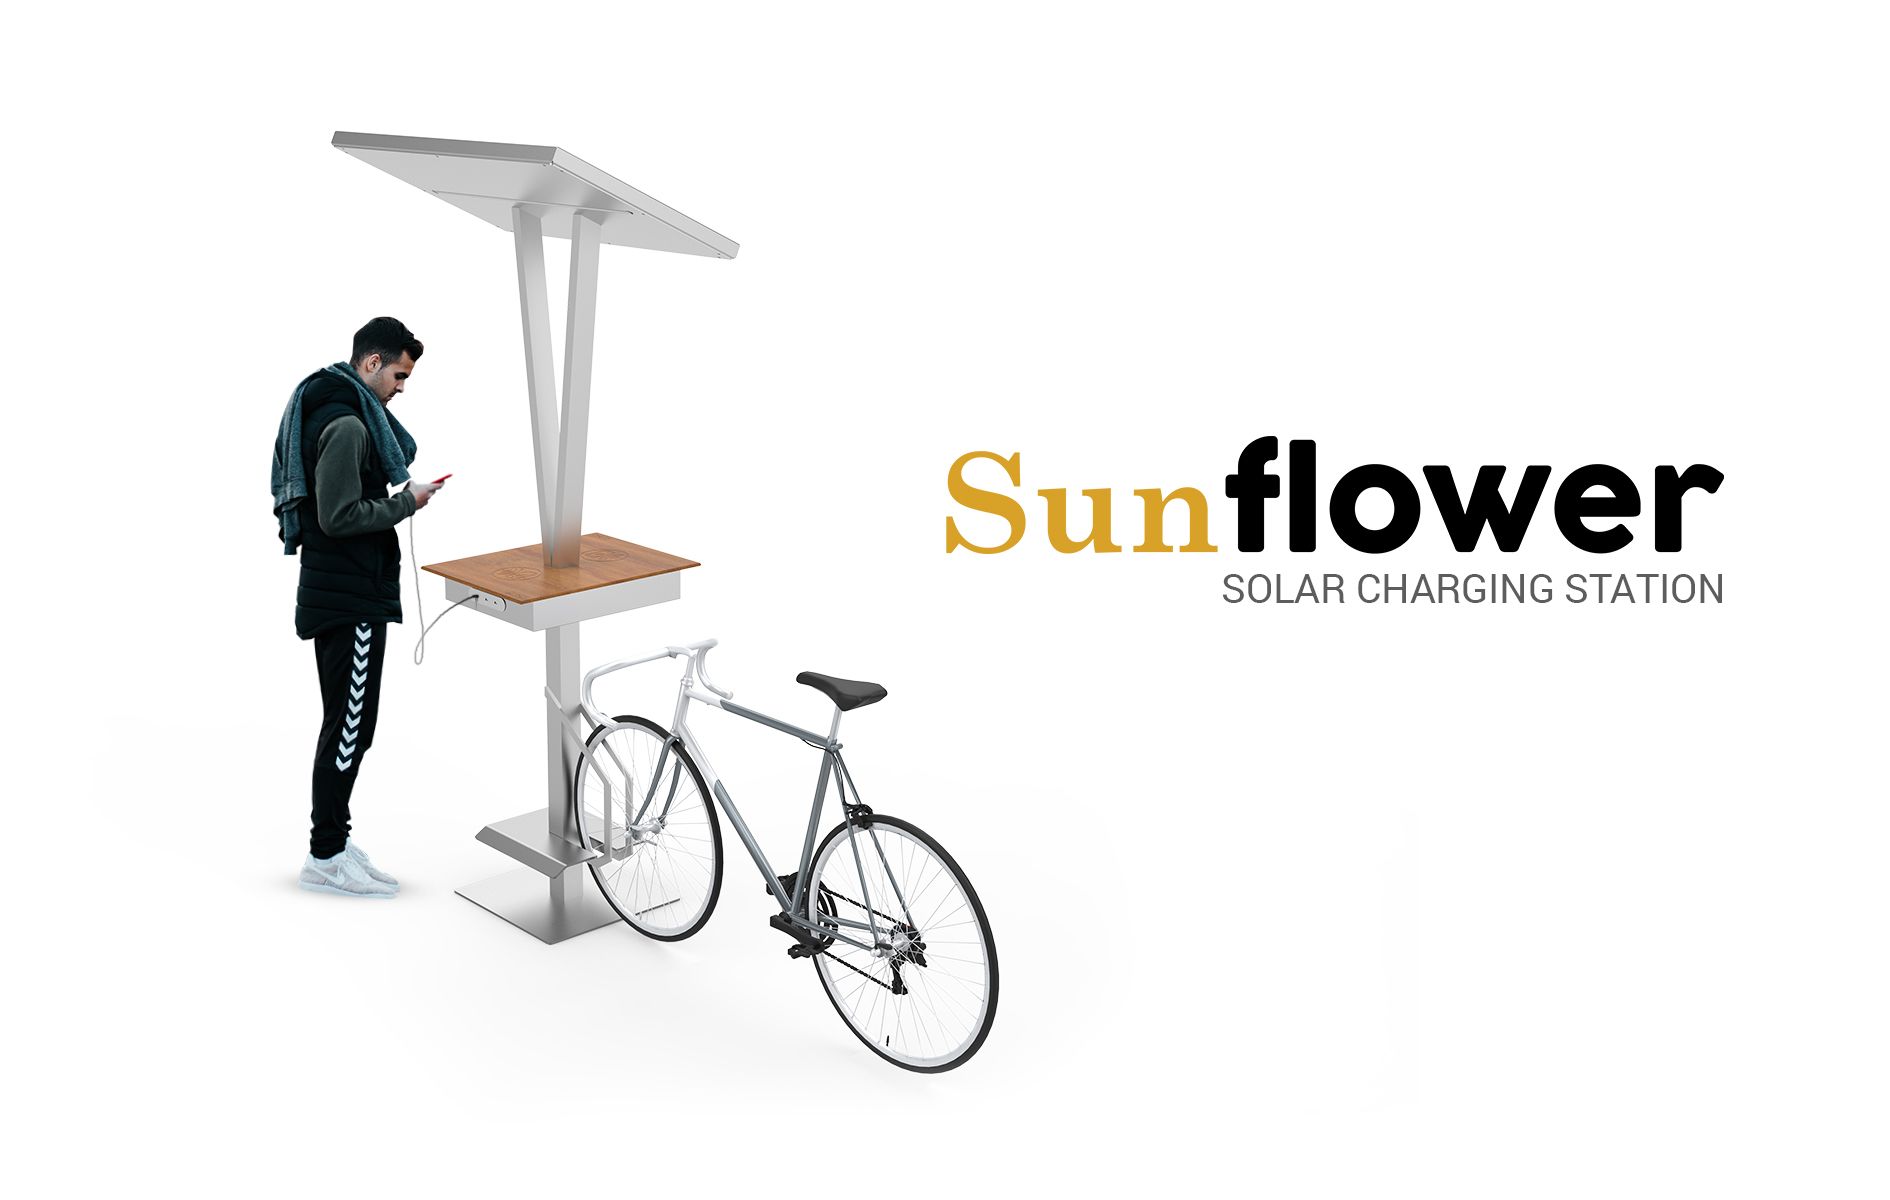 Solar charging station made of stainless steel and high pressure laminate